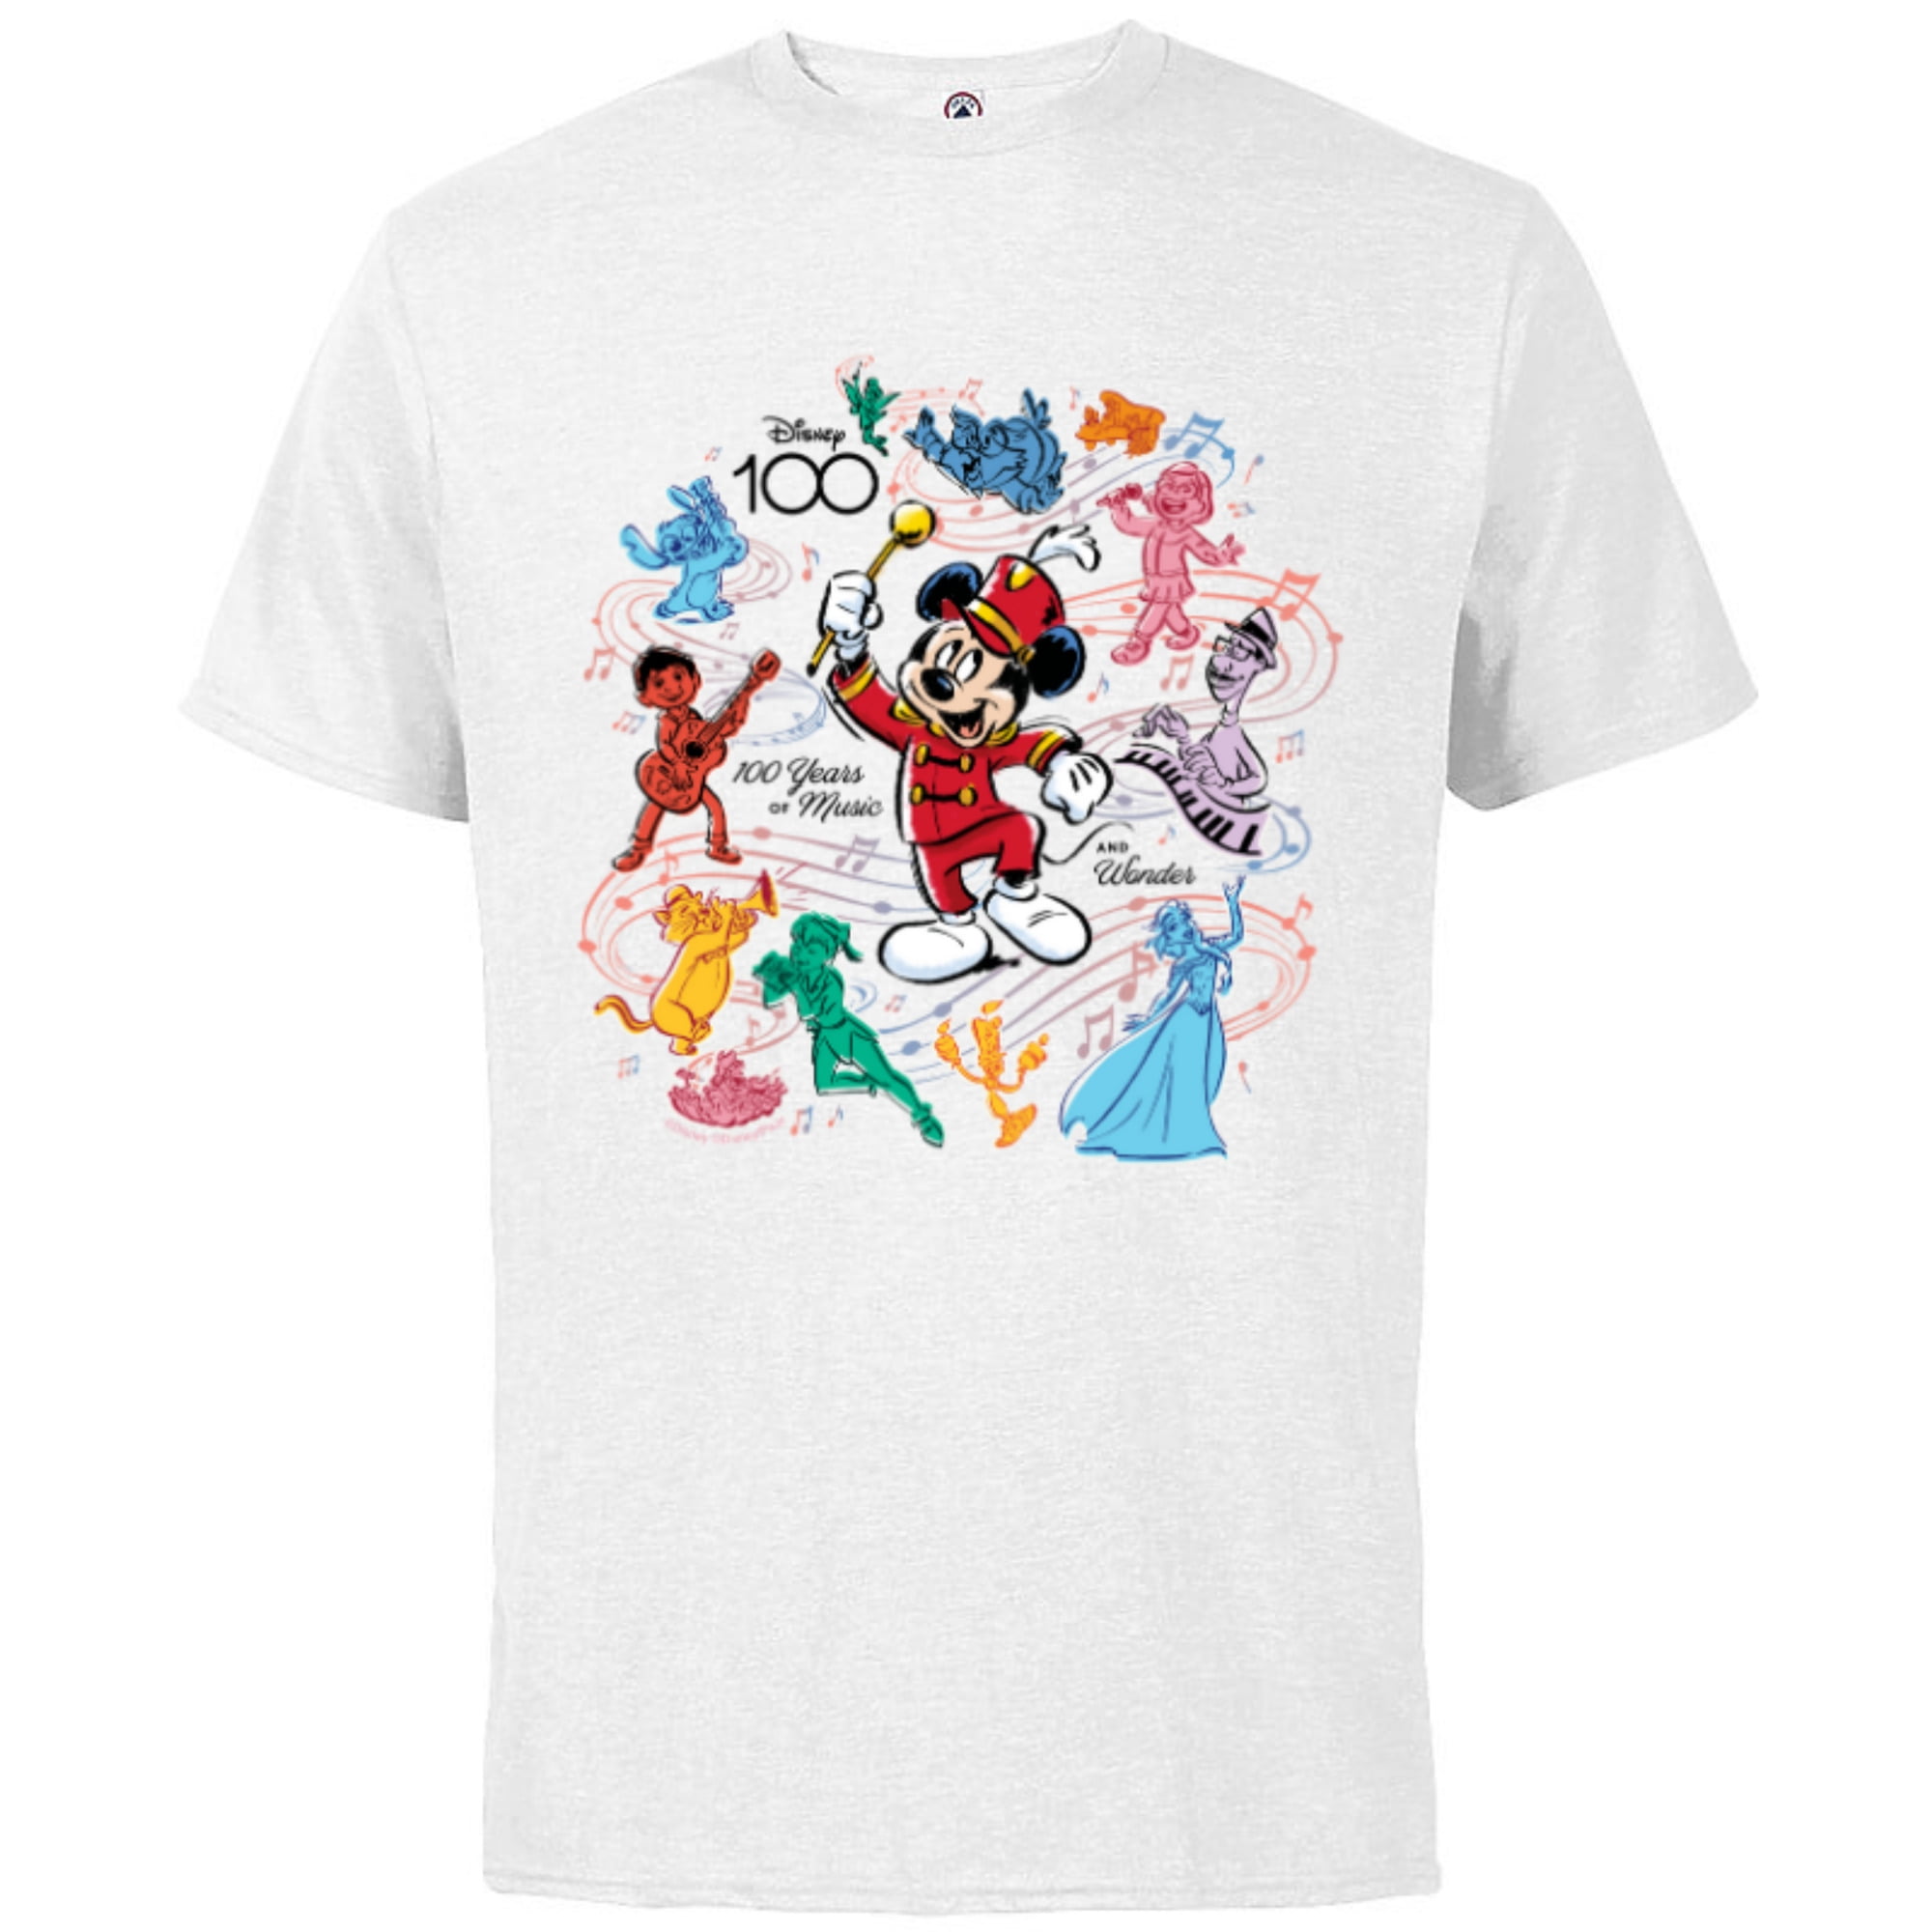 Comfort Colors® Disney 100 Years of Wonder Shirt, Chip and Dale